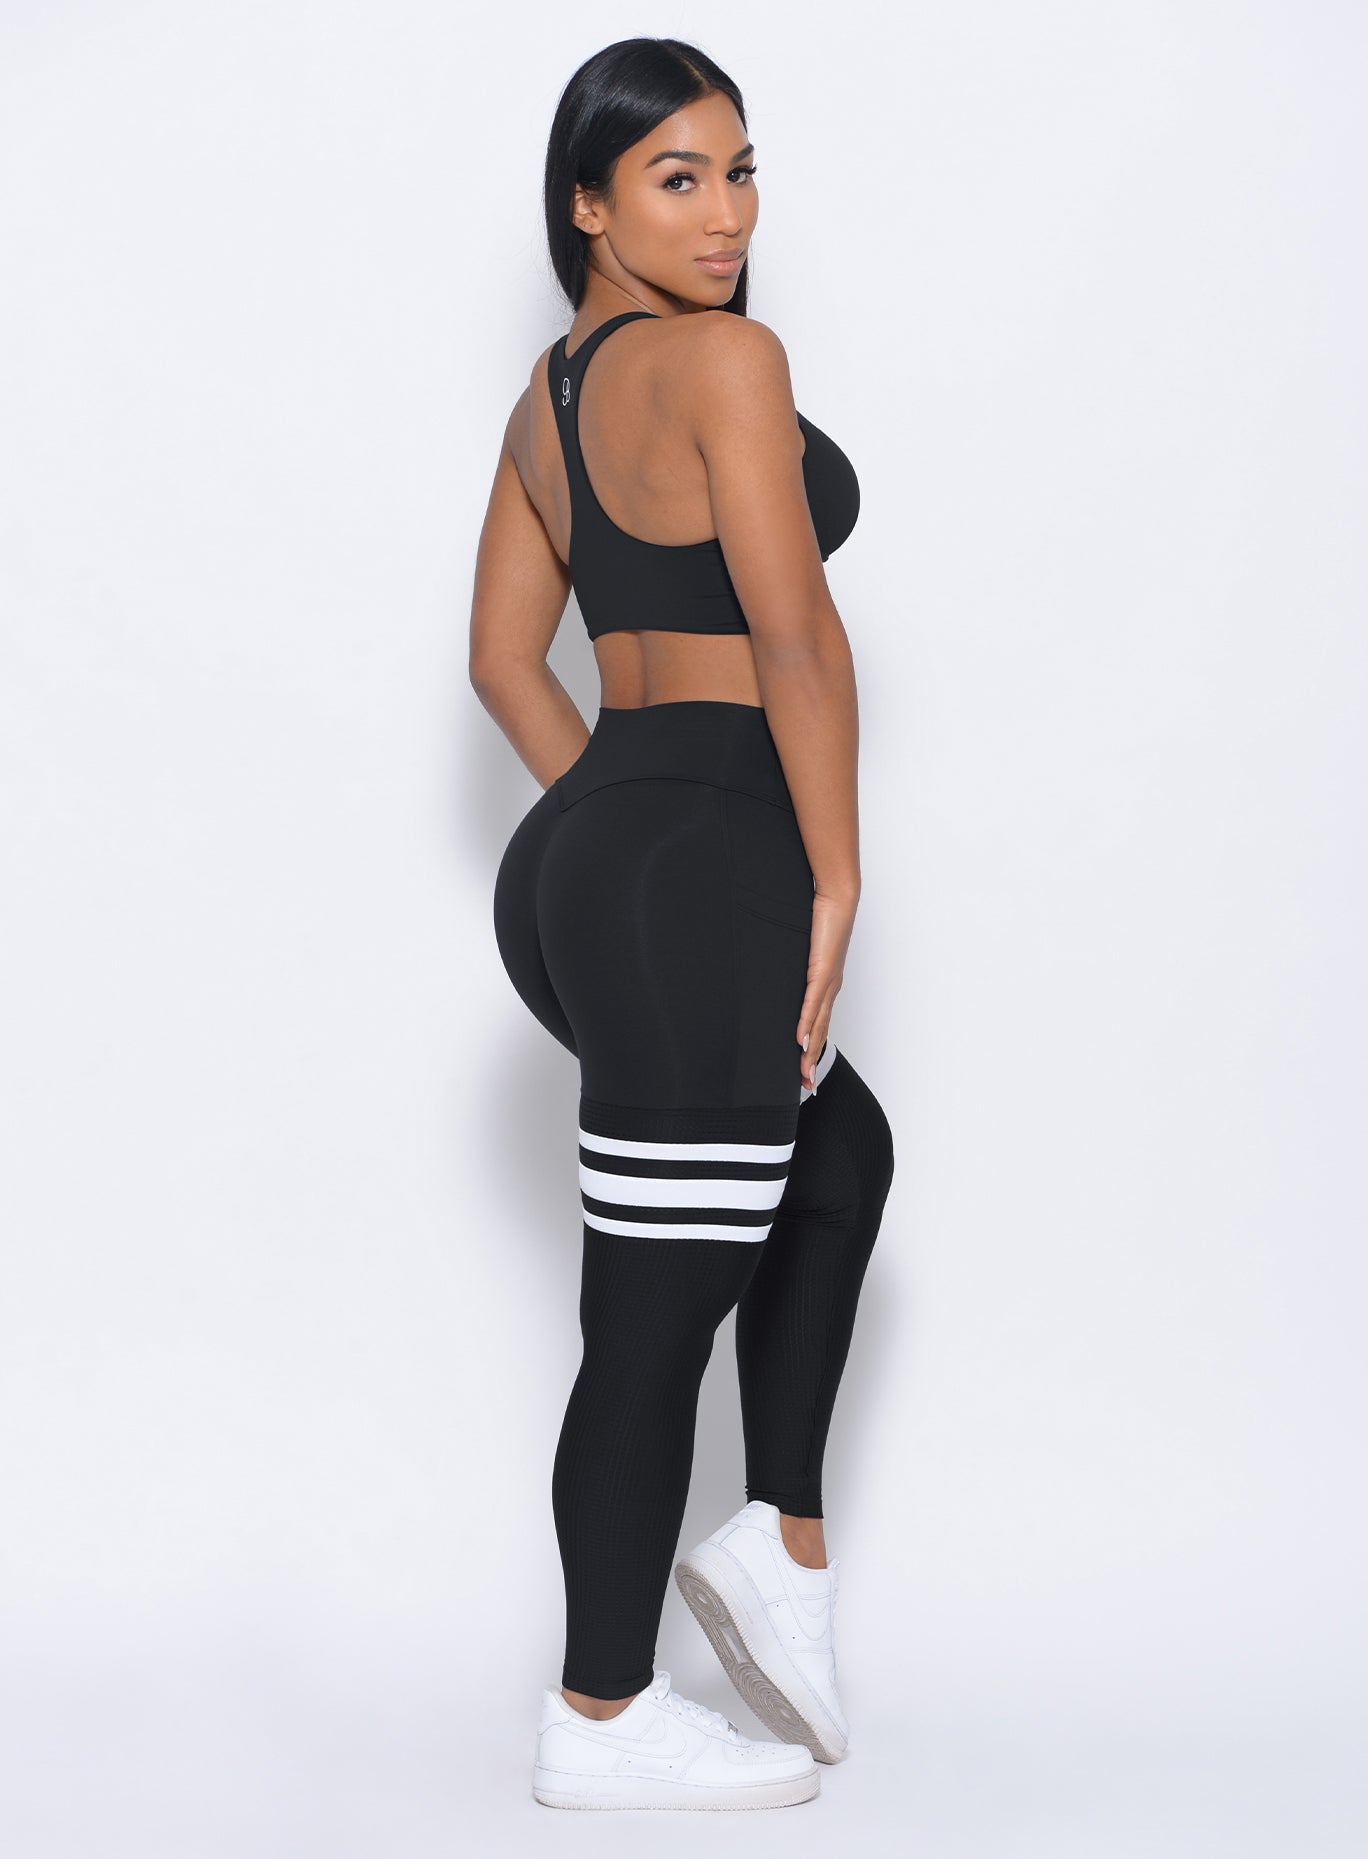 Right side profile view of the model wearing our black perform thigh high leggings and a matching bralette 